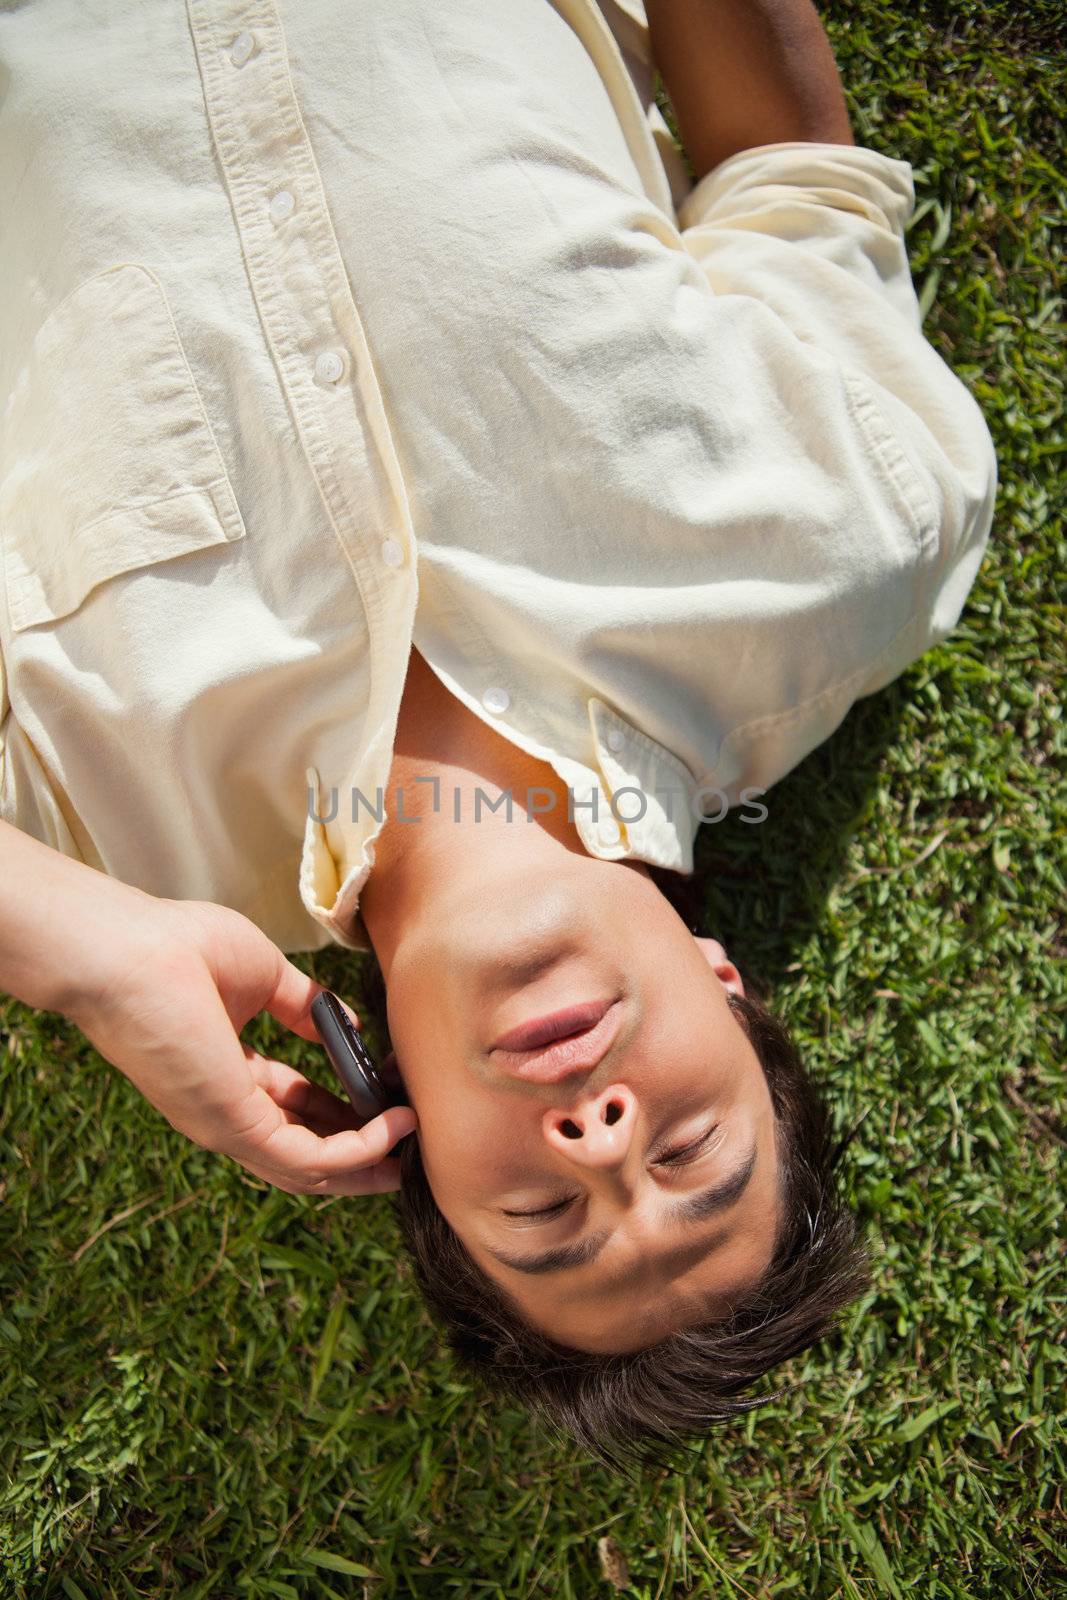 Man with his eyes closed using a mobile phone as he lies down on the grass